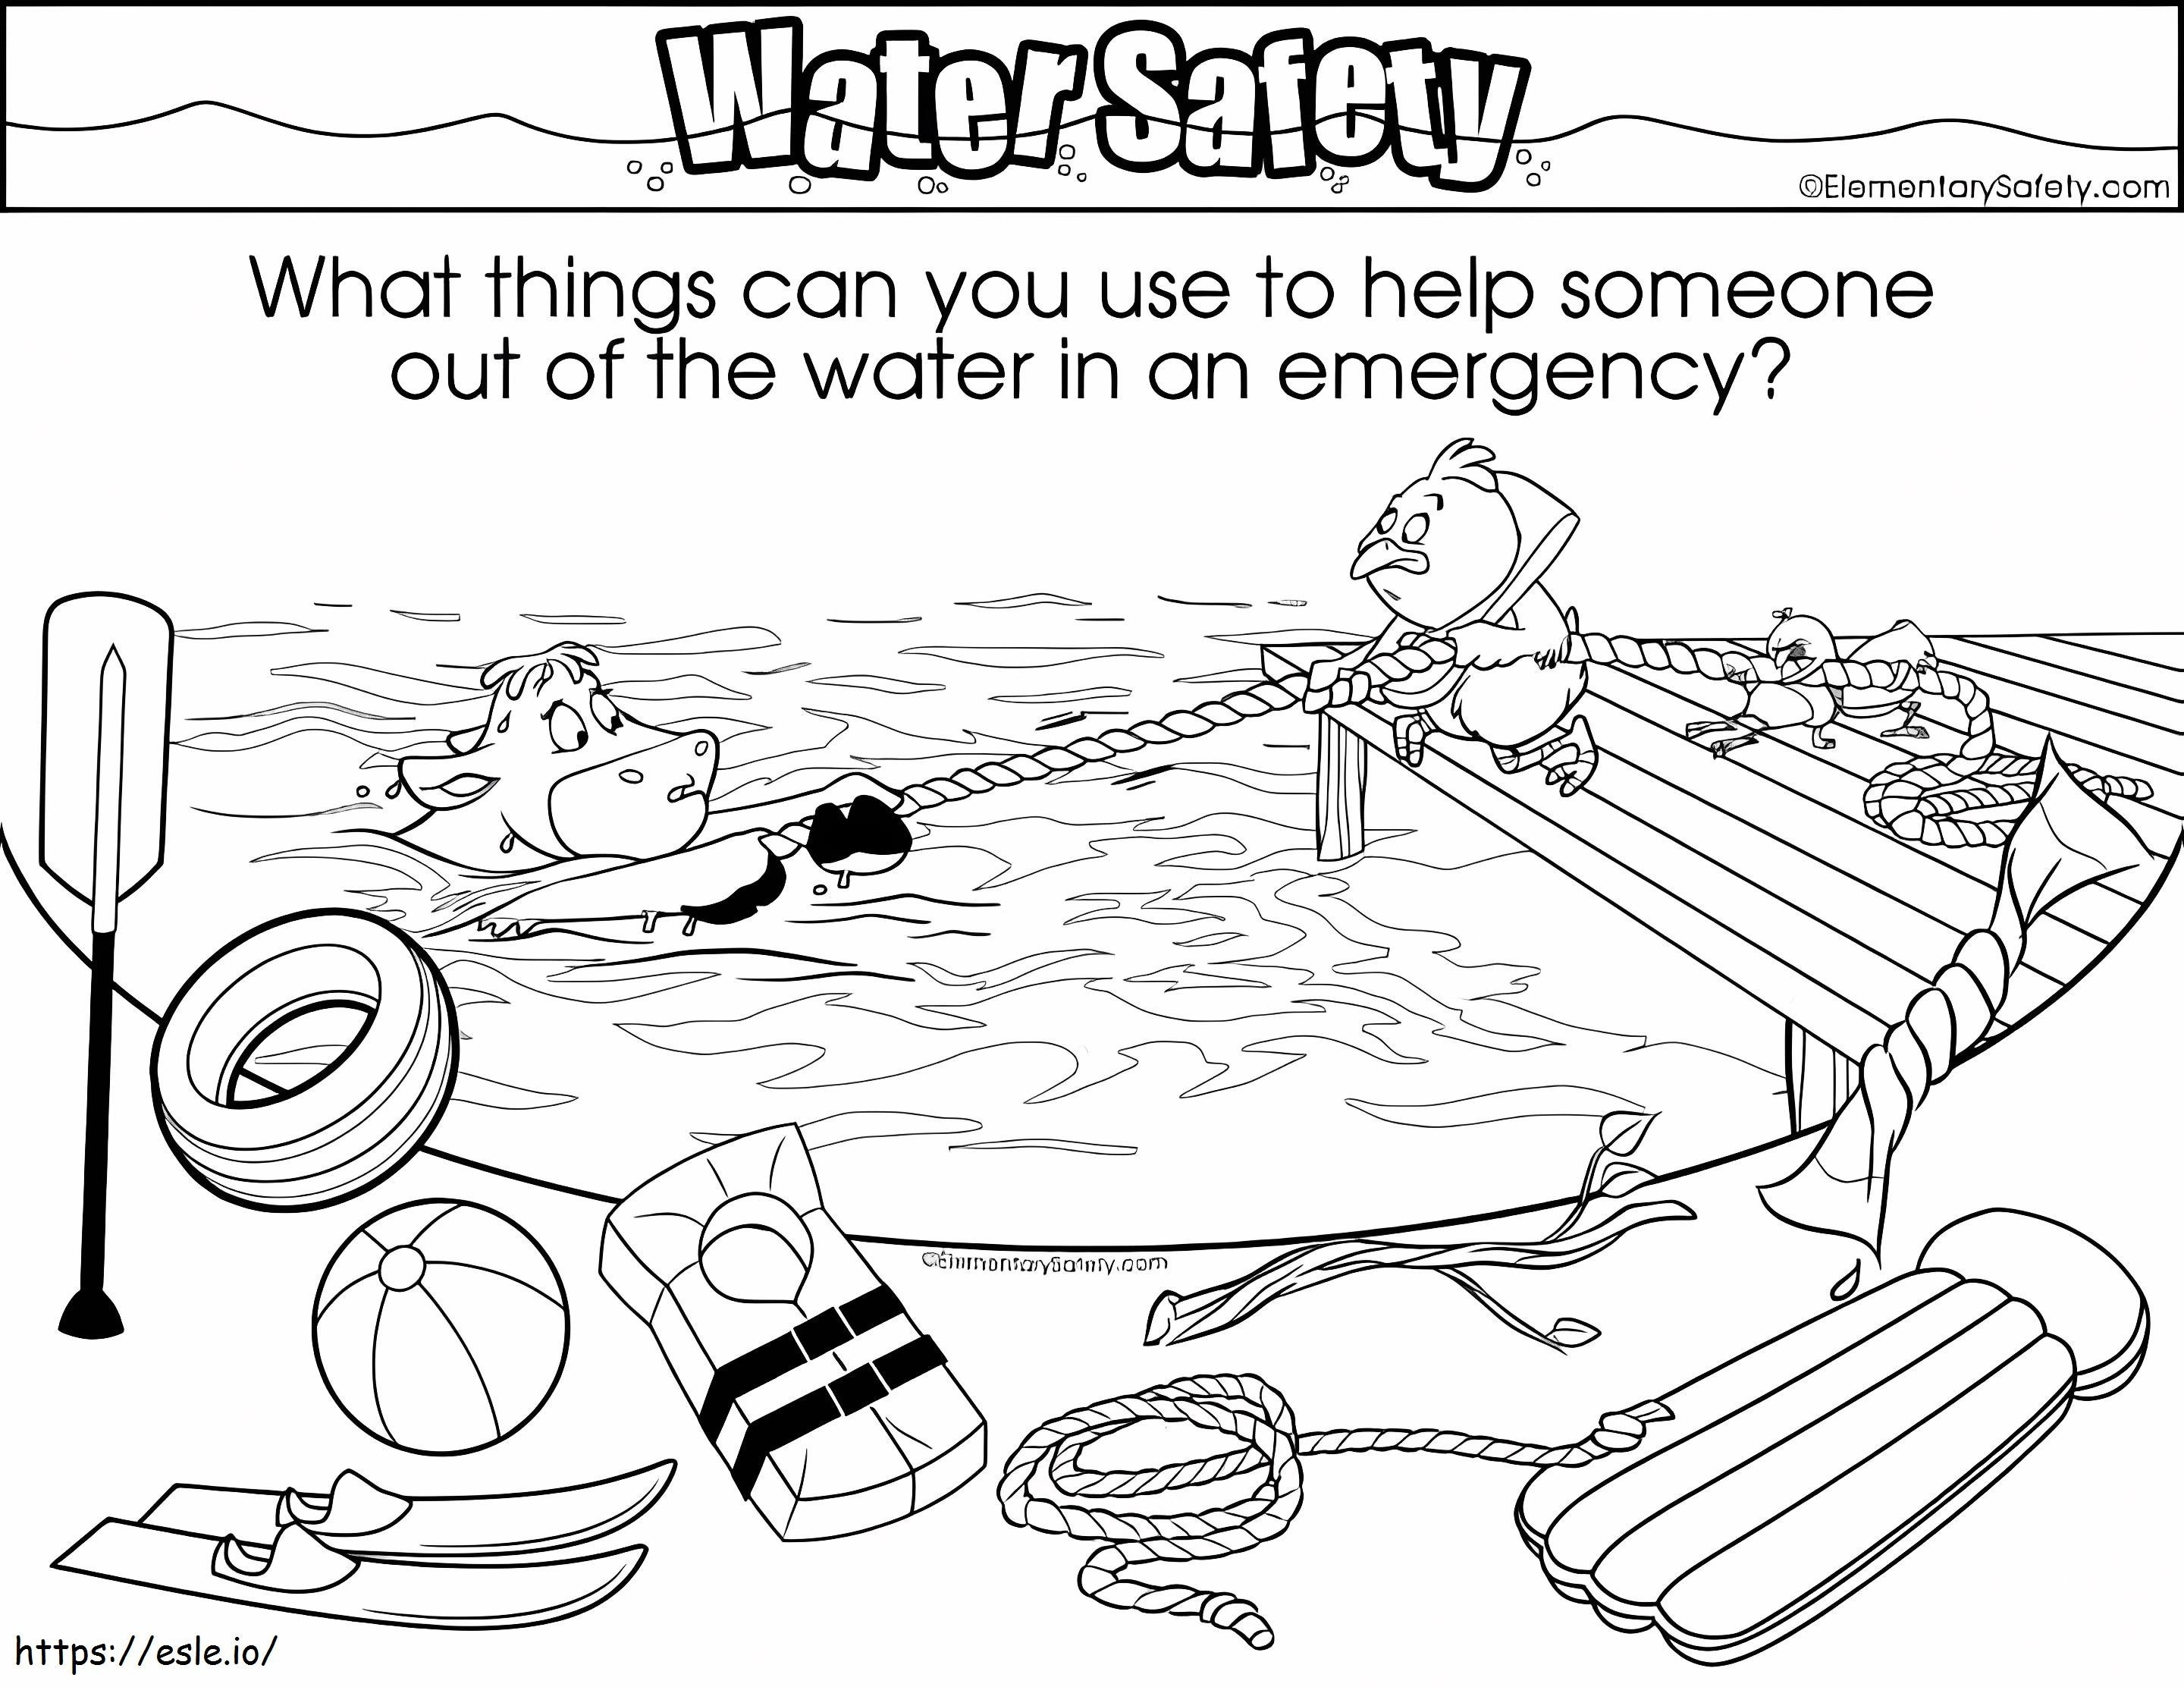 Water Emergency Objects coloring page